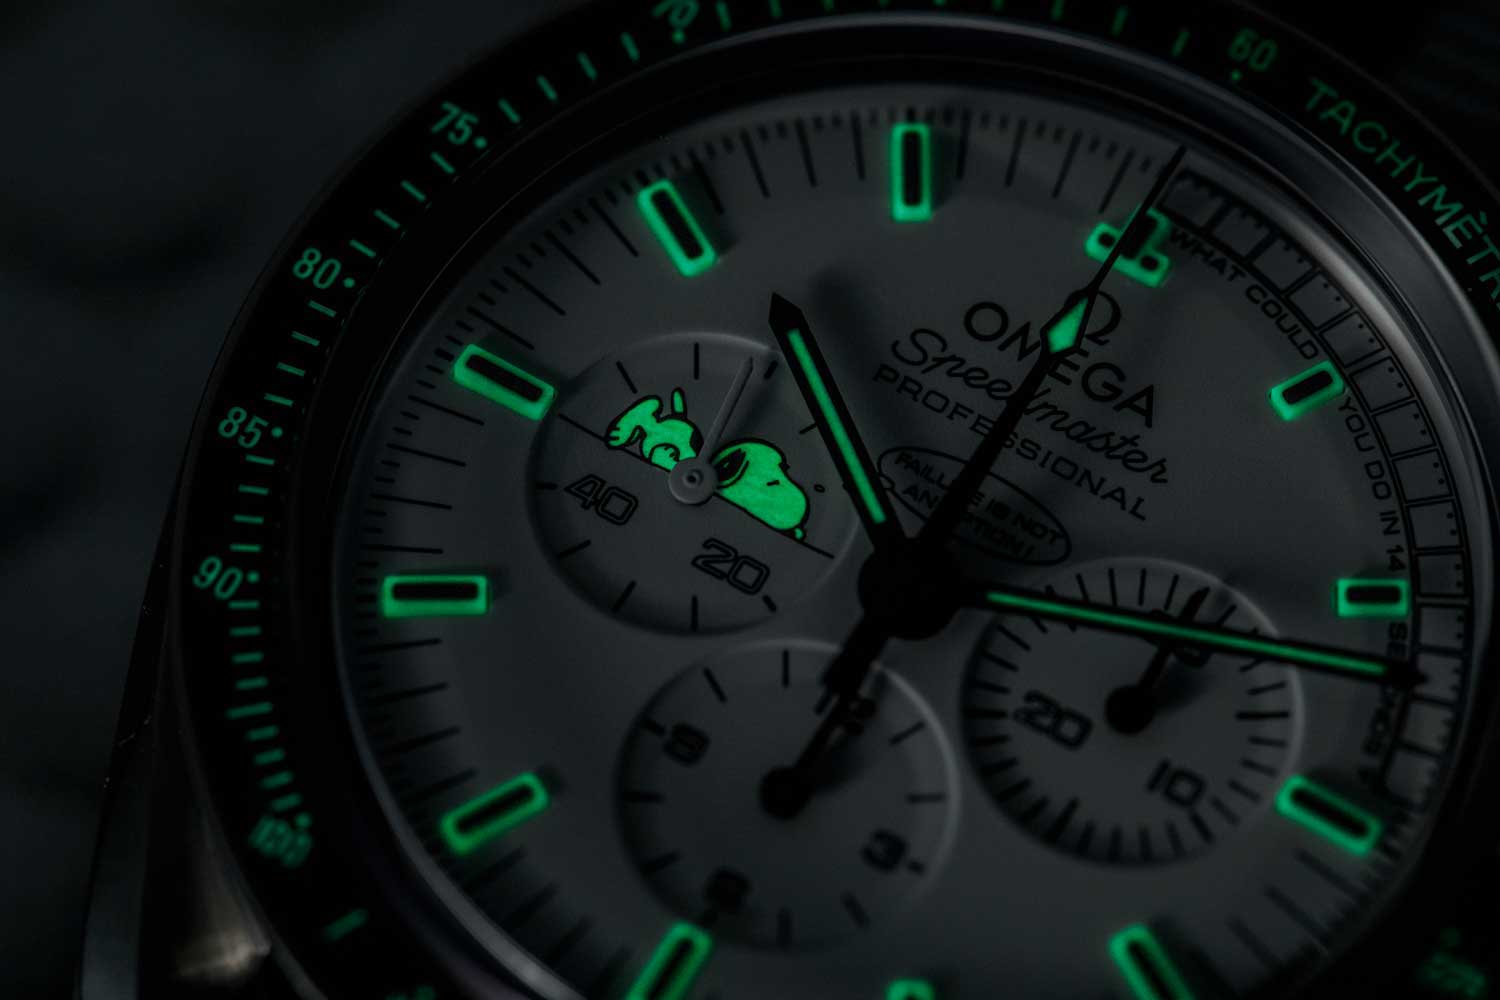 The Silver Snoopy Speedmaster's dial and bezel glowing in the dark (Image © Revolution)